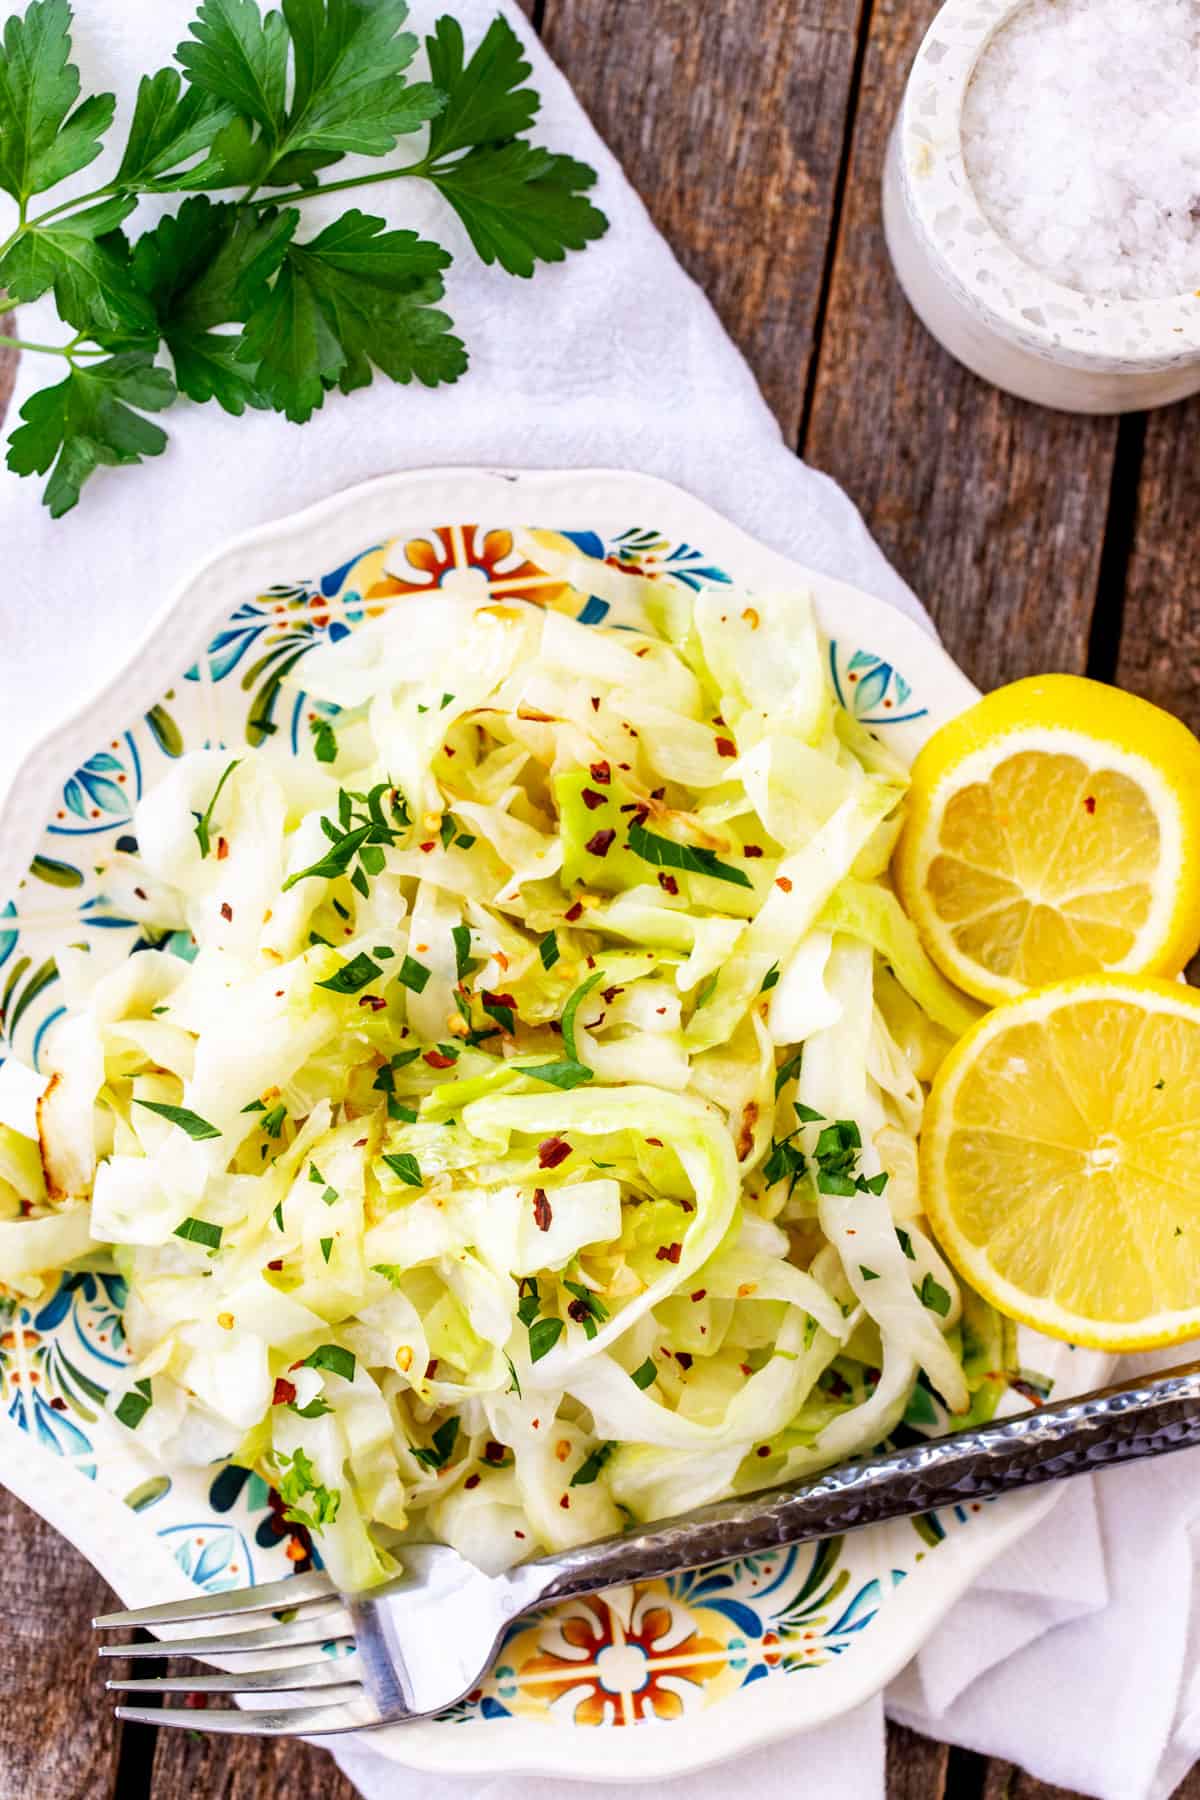 Overhead photo of a plate of cabbage noodles garnished with lemon and parsley.